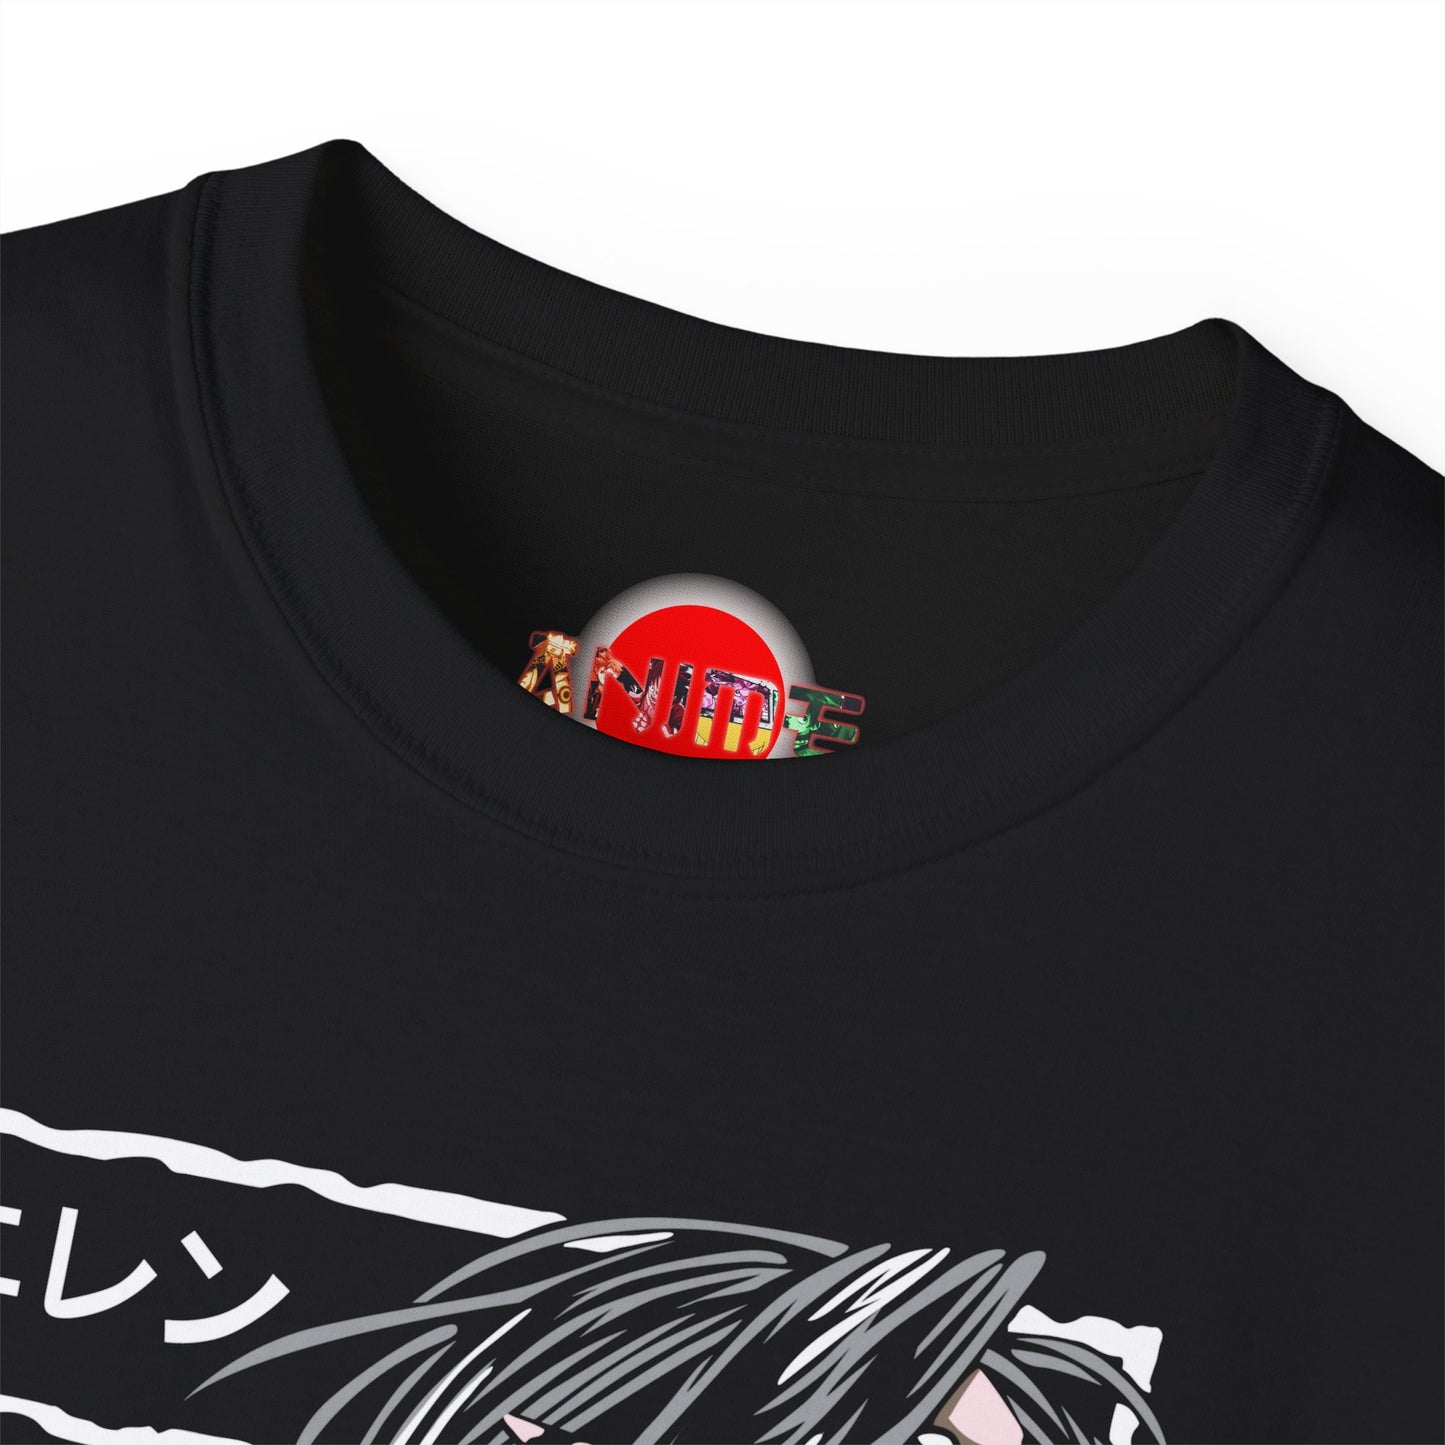 Regular Fit Graphic Tees | Attack on Titans Tee | Japanese Anime World